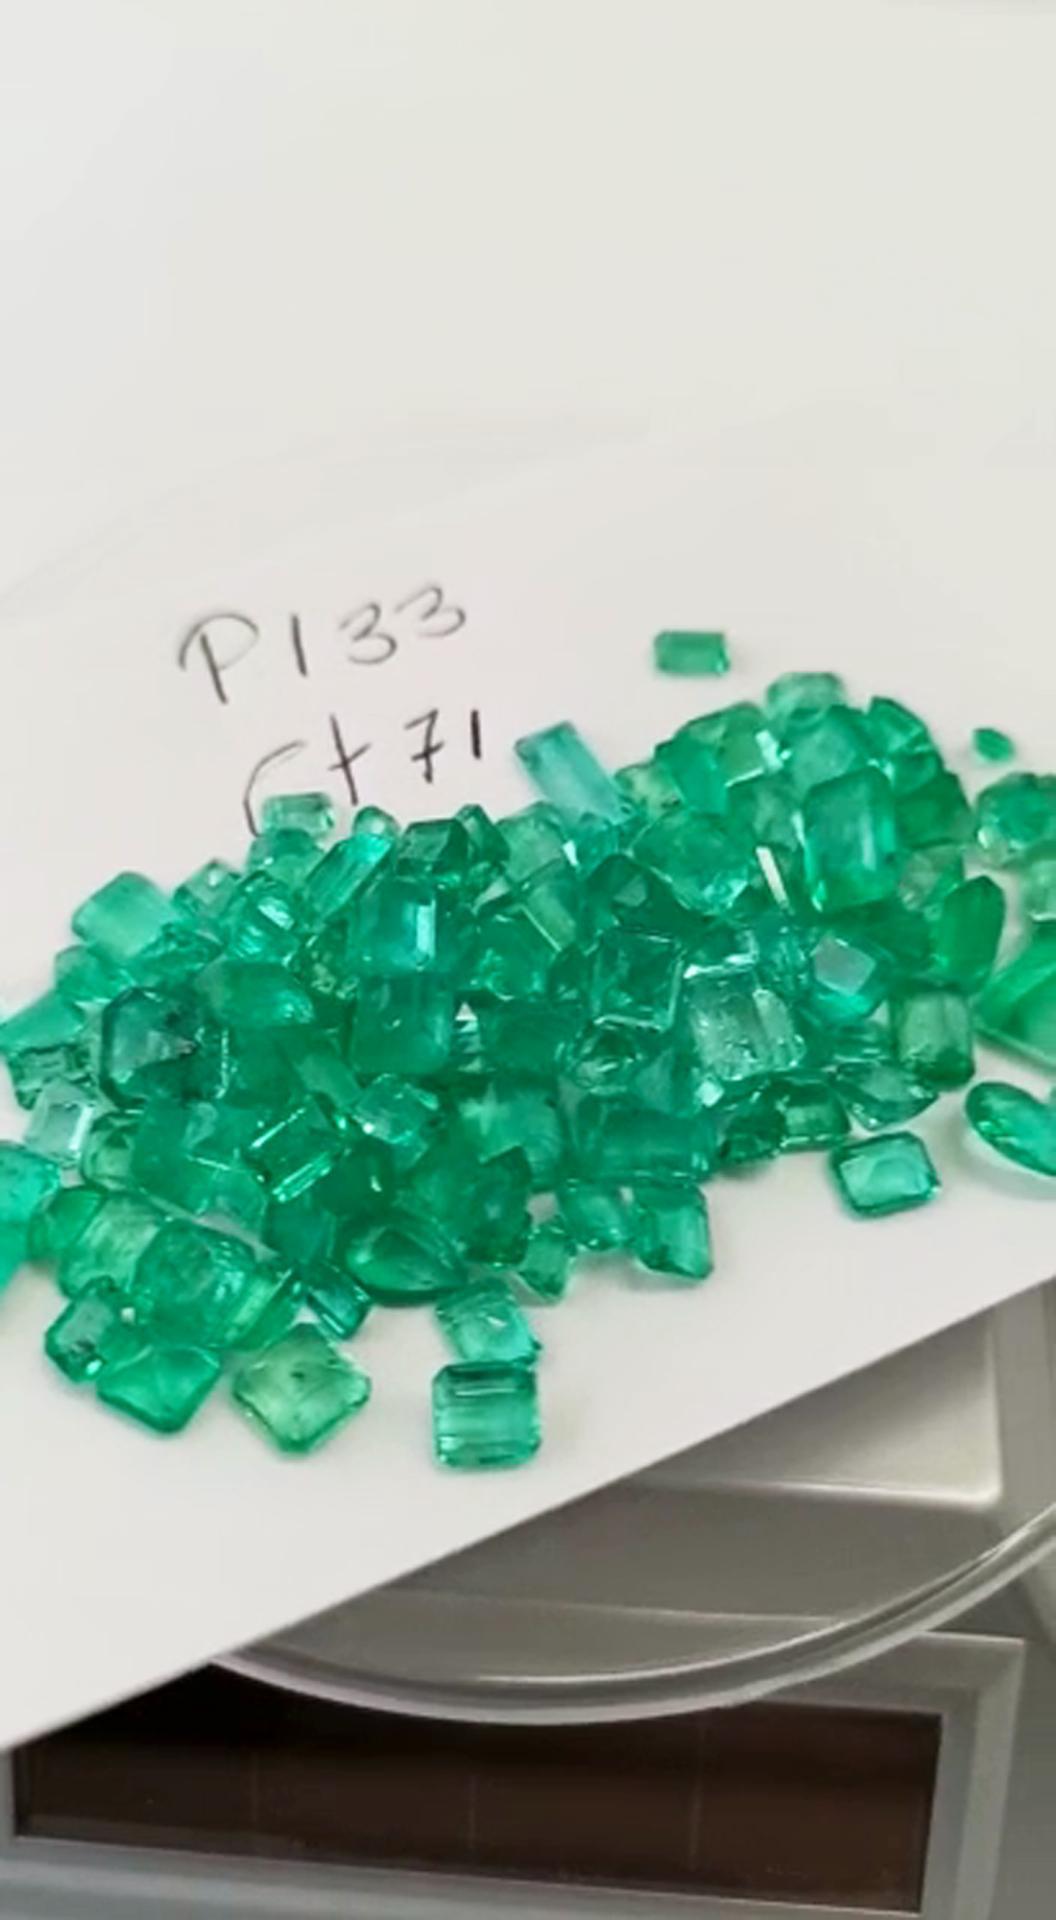 71 Ct.  Colombian Emerald Lot 